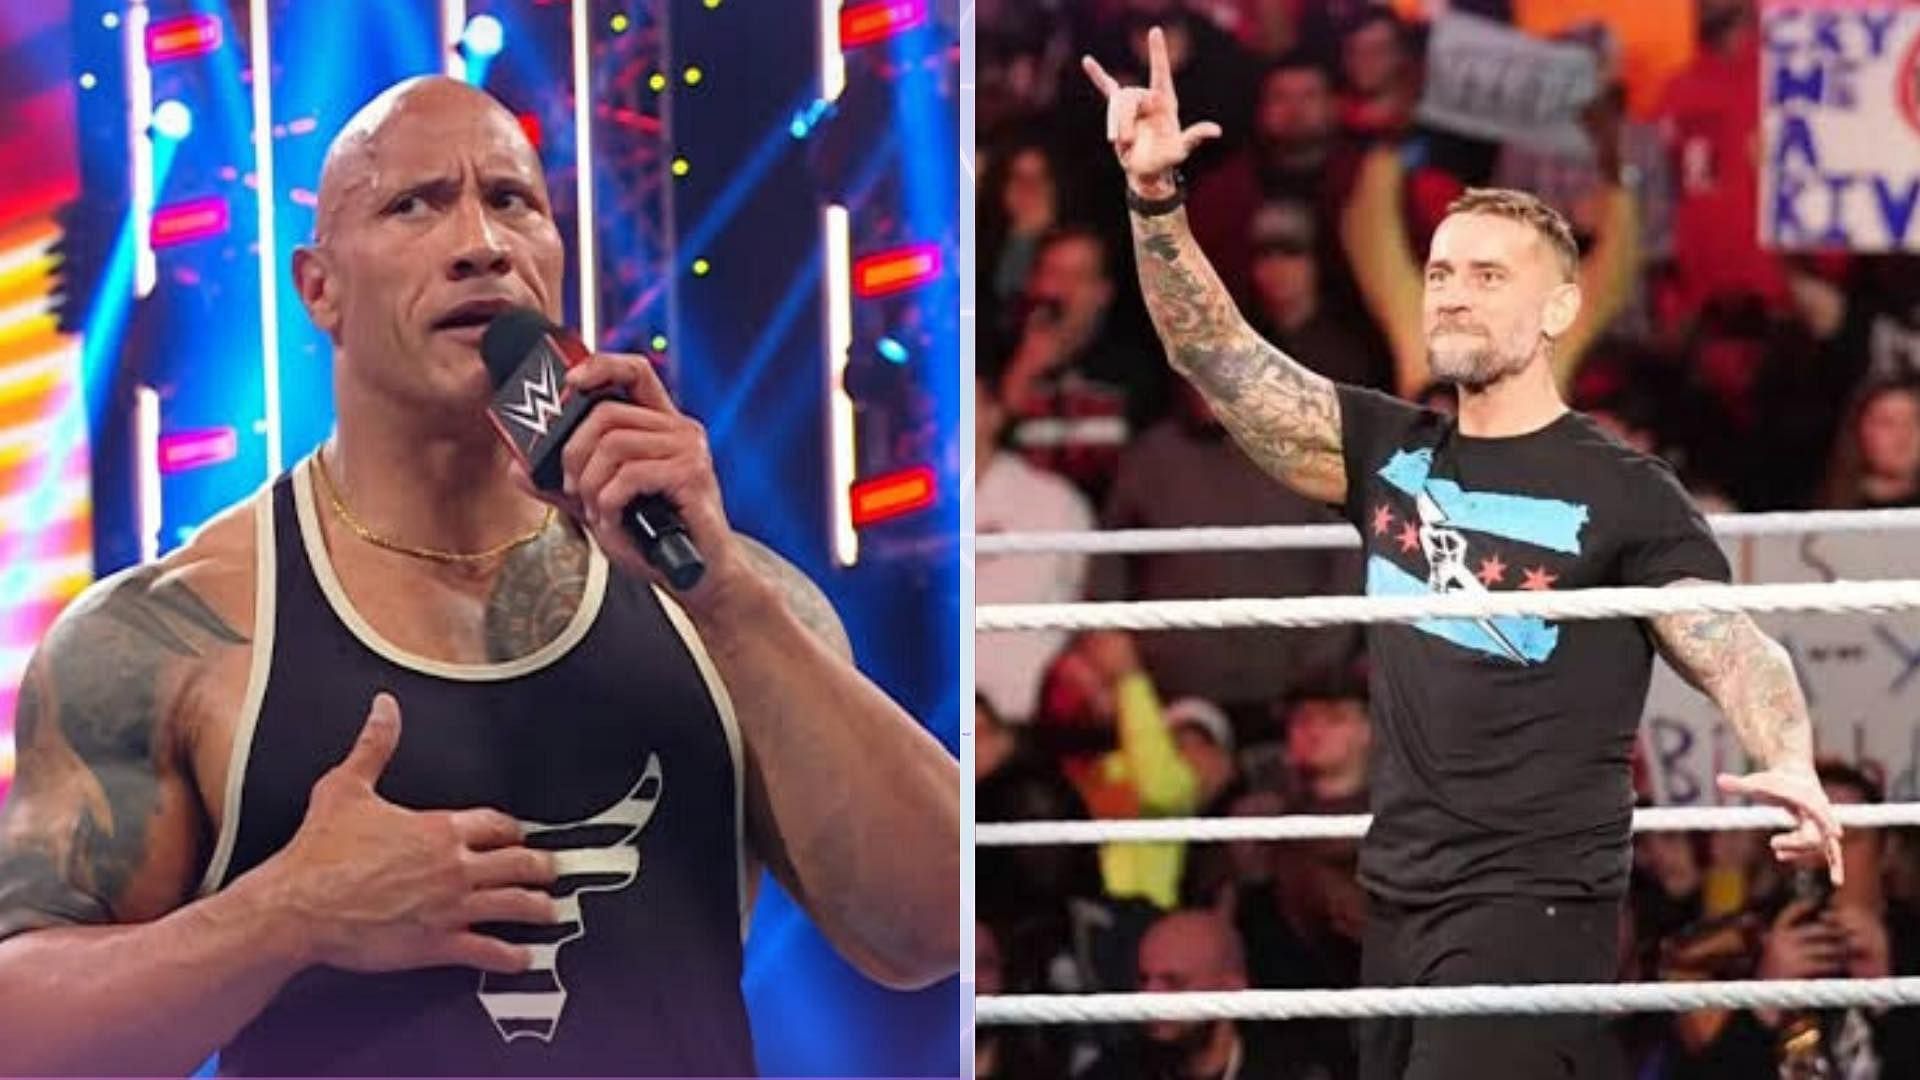 The Rock and CM Punk